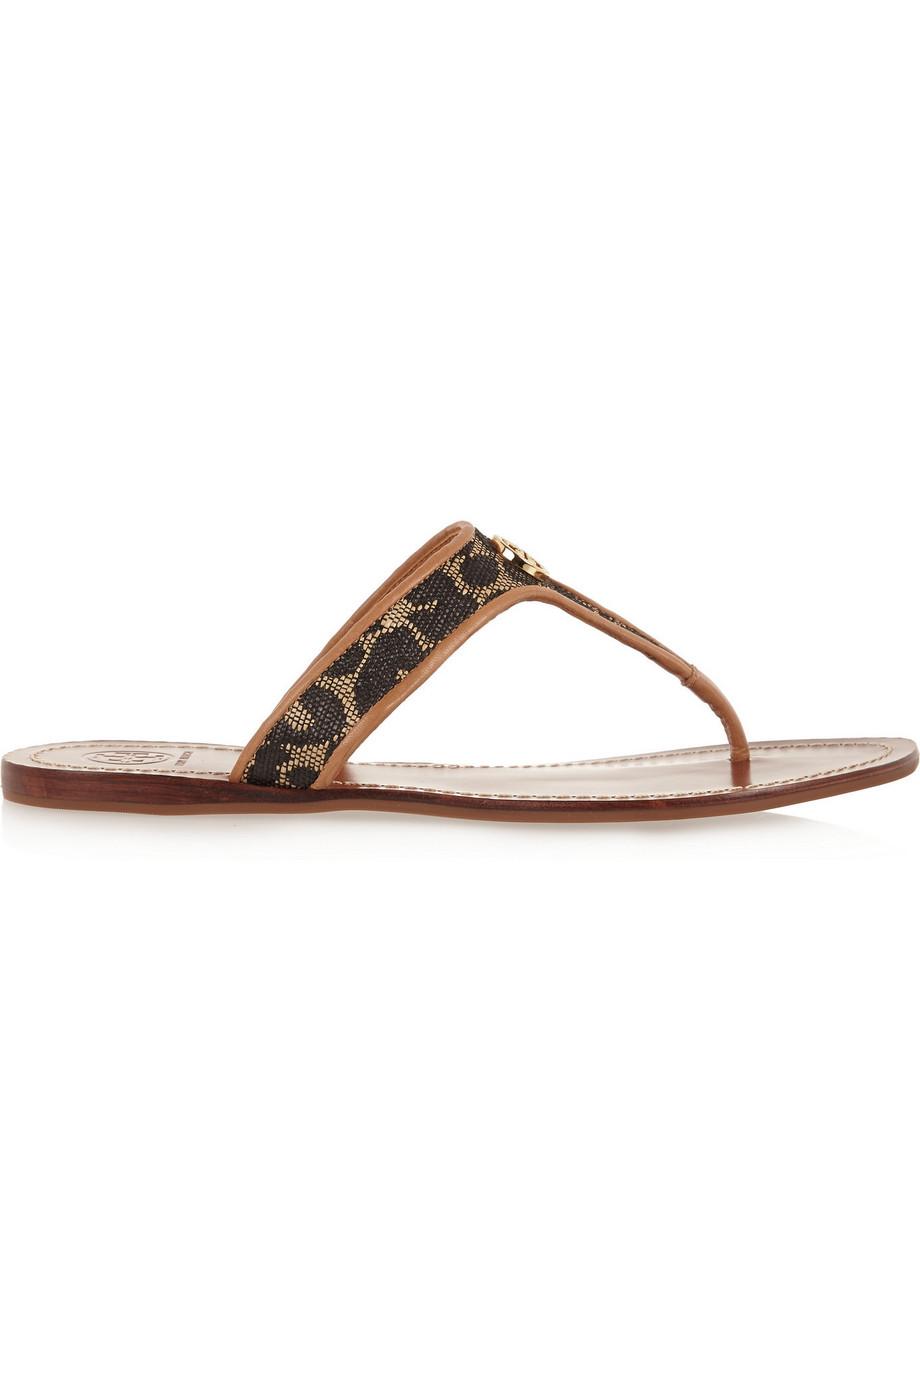 Tory Burch Cameron Leather-trimmed Woven Sandals | ModeSens